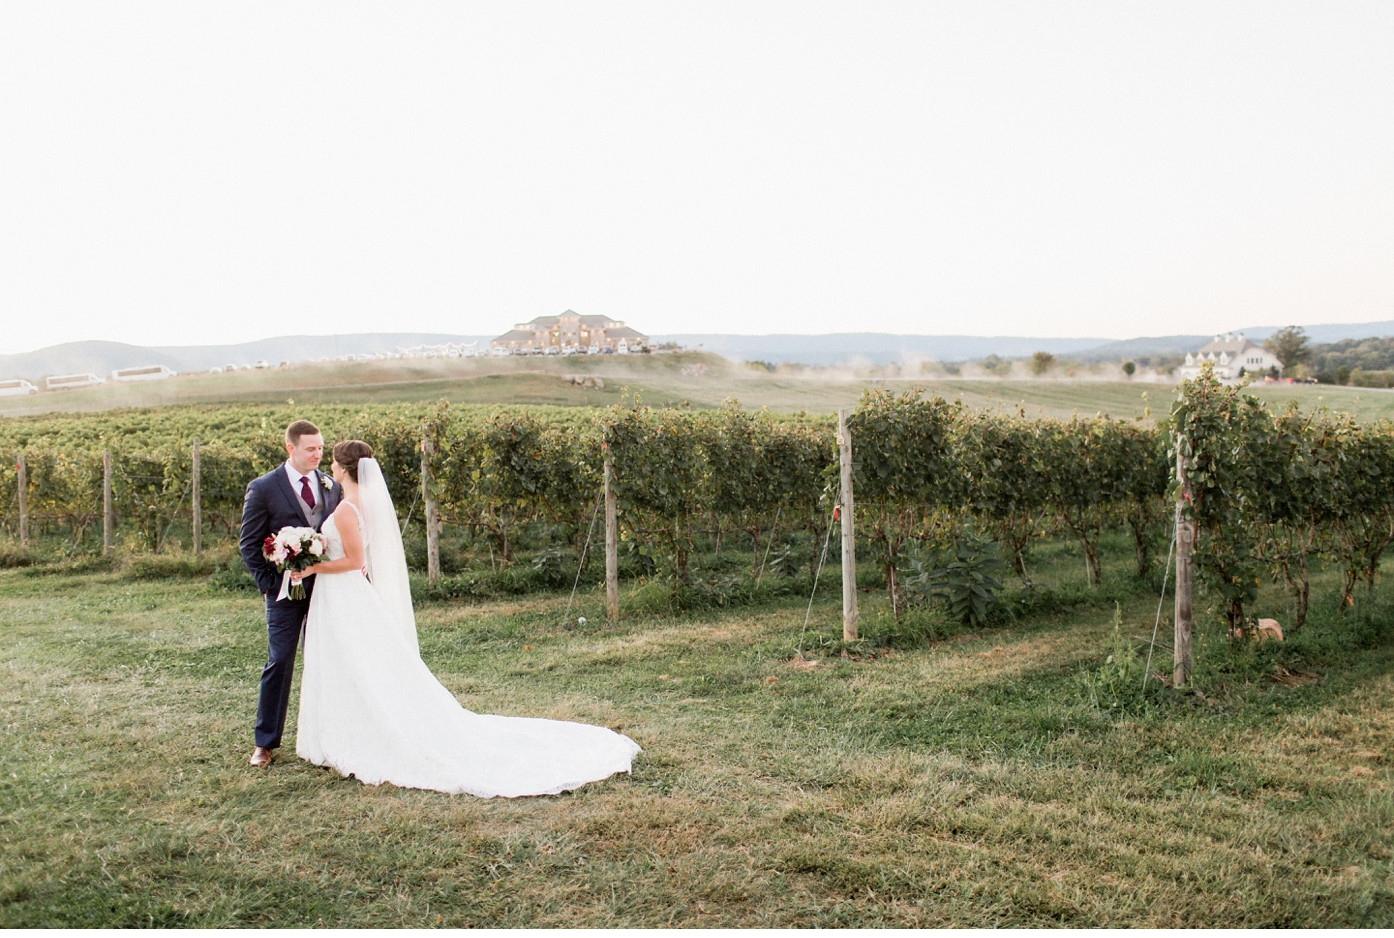 Wedding at Blue Valley Vineyard and Winery by Alisandra Photography